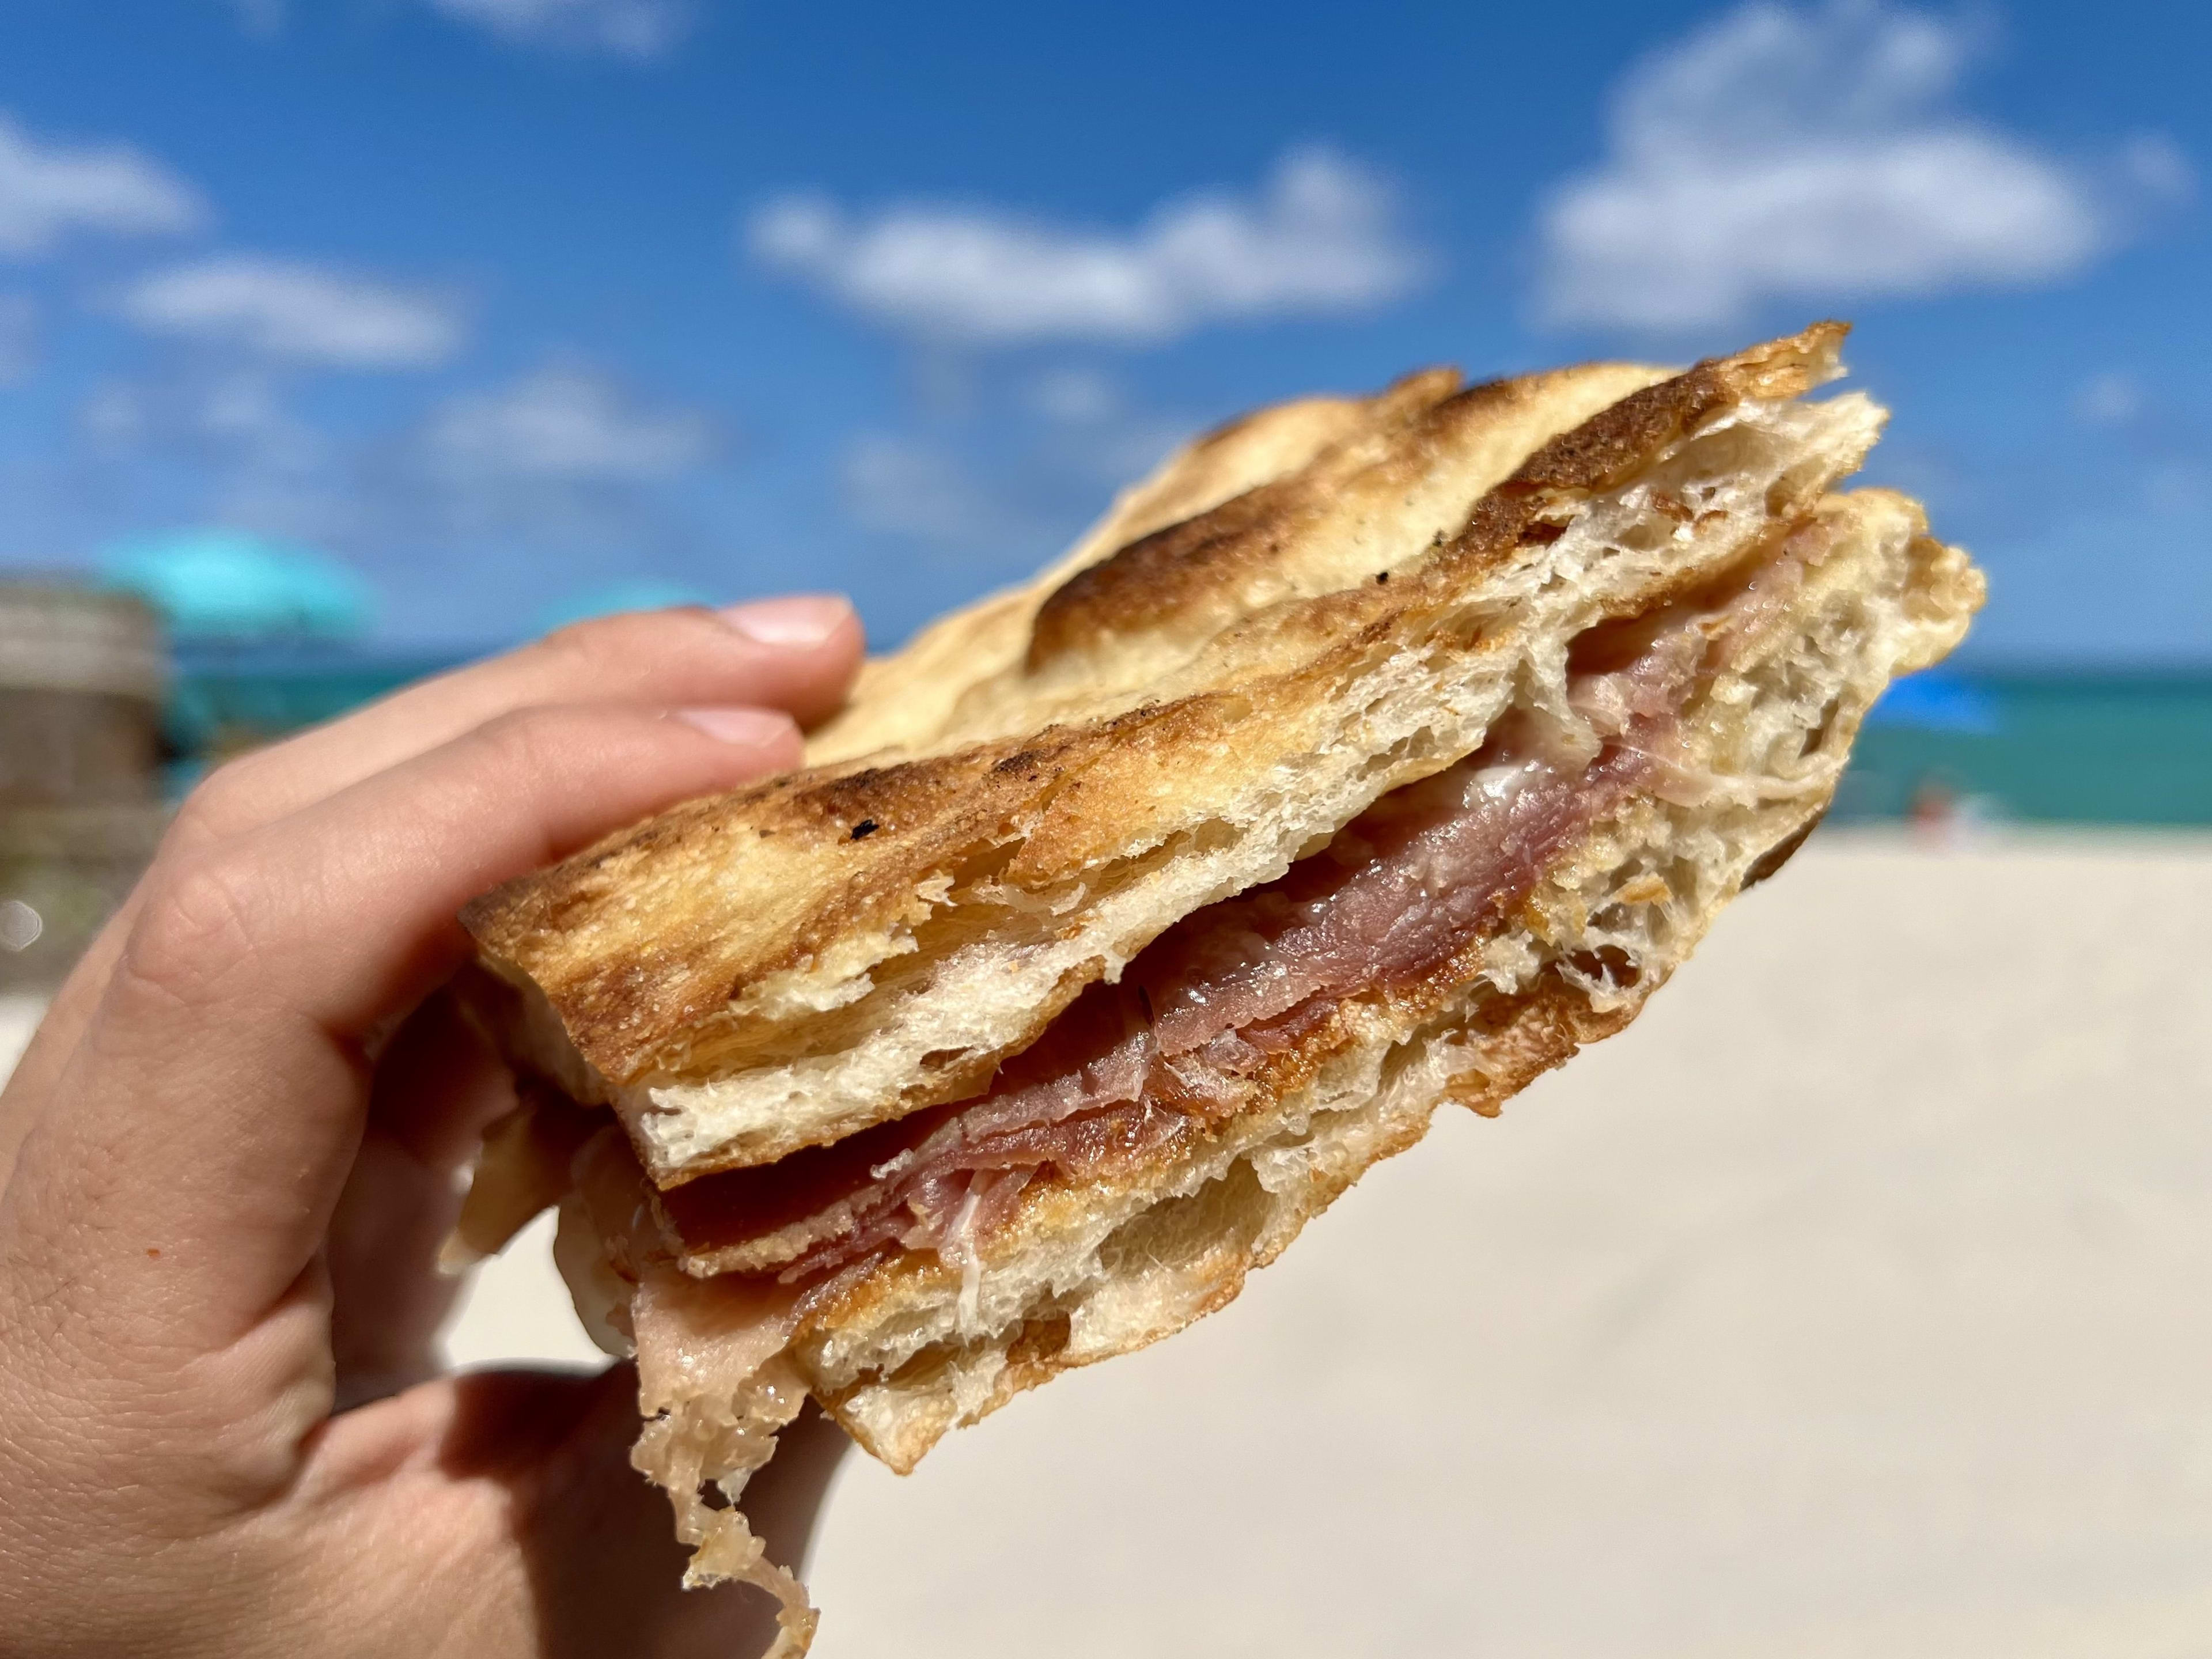 A sandwich held up on the beach, with the ocean in the background.